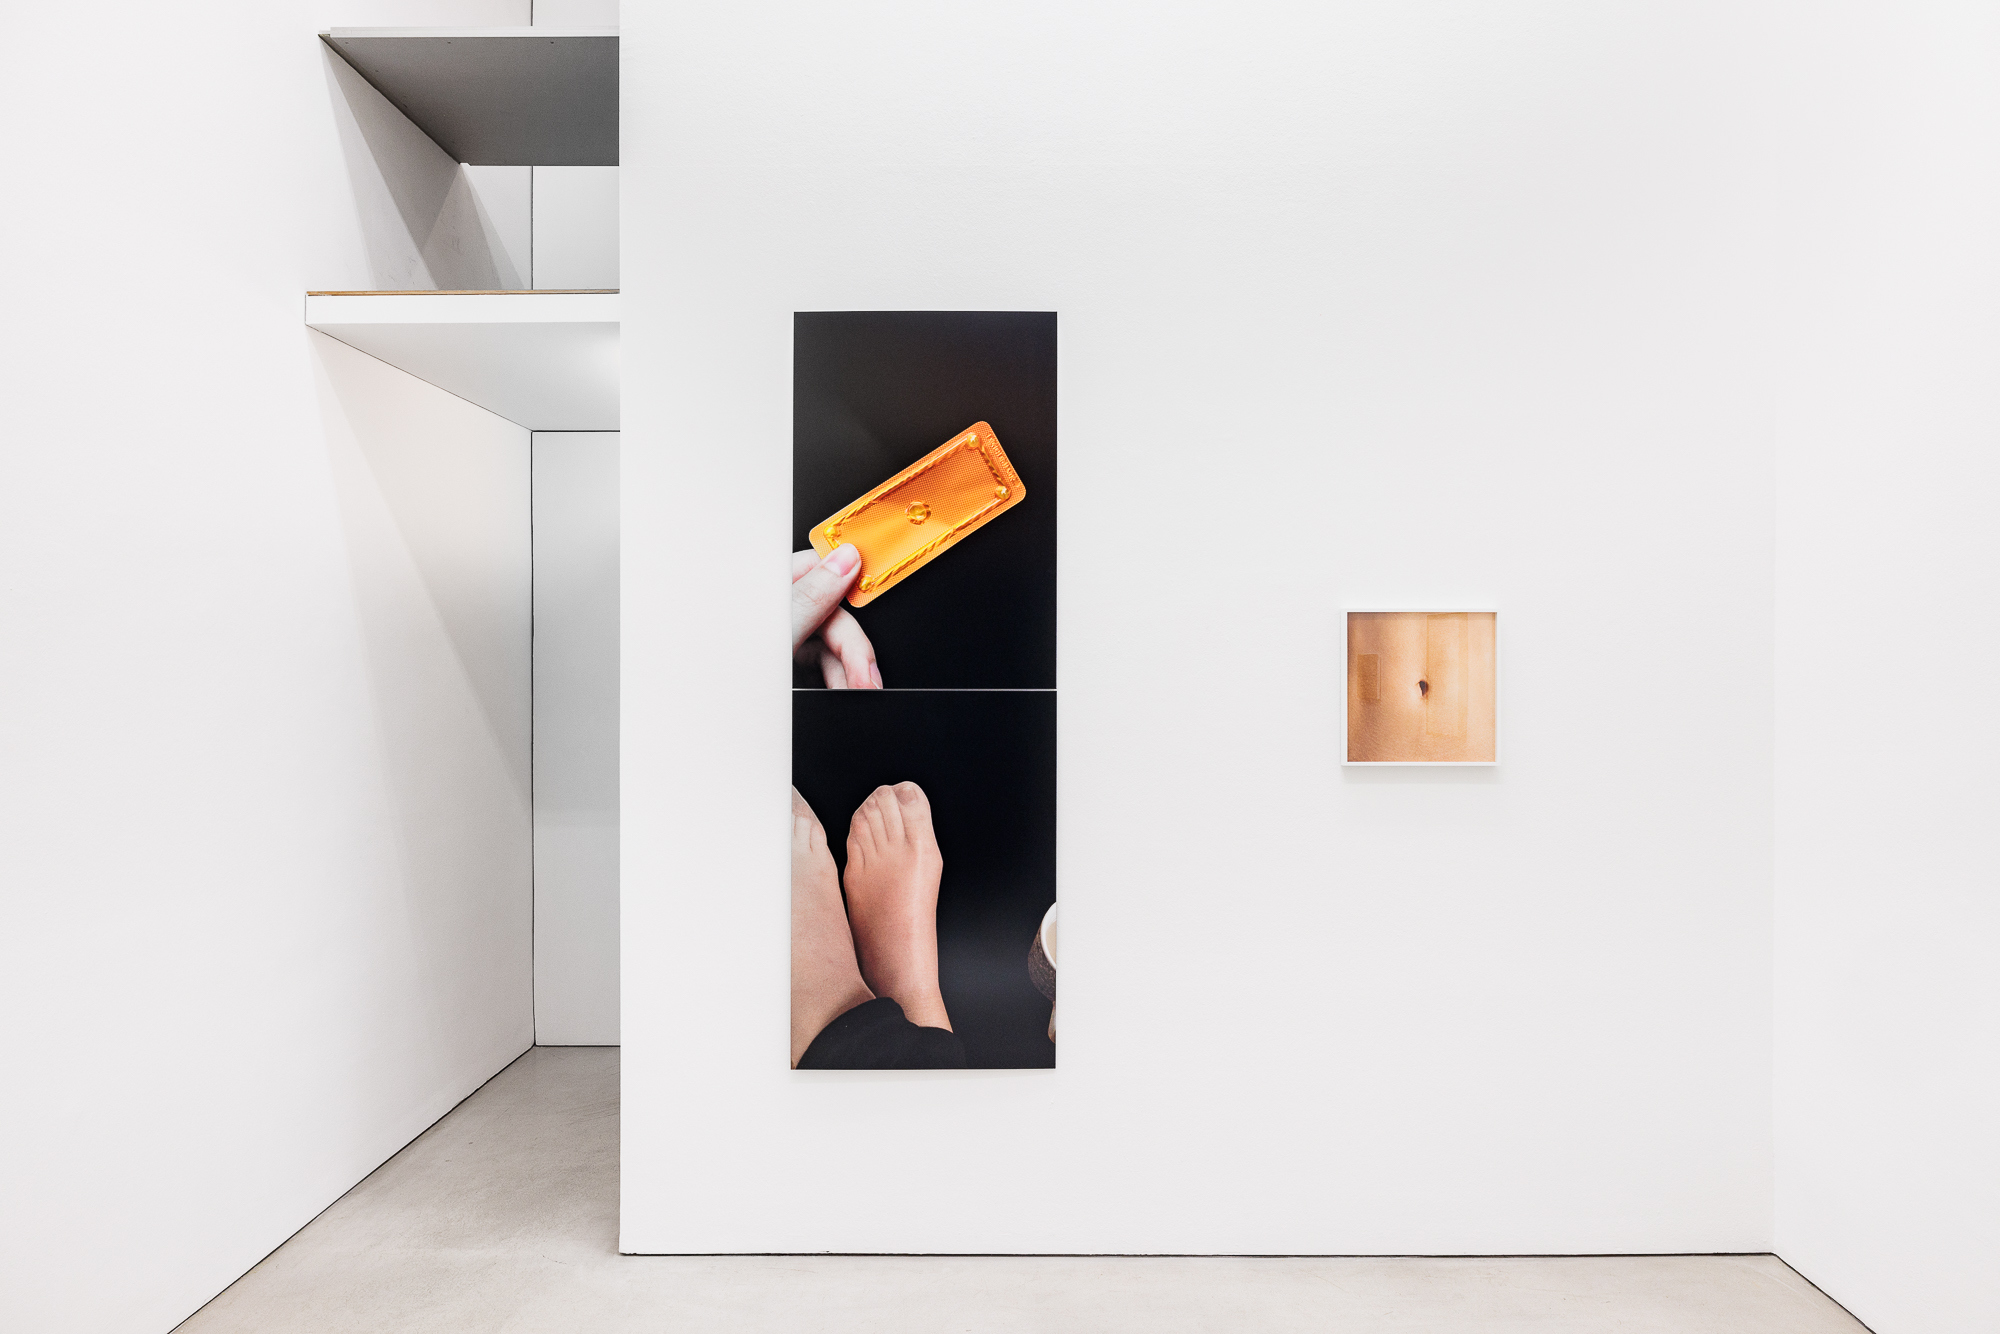 Body at Play, Georg Kargl BOX, exhibition view